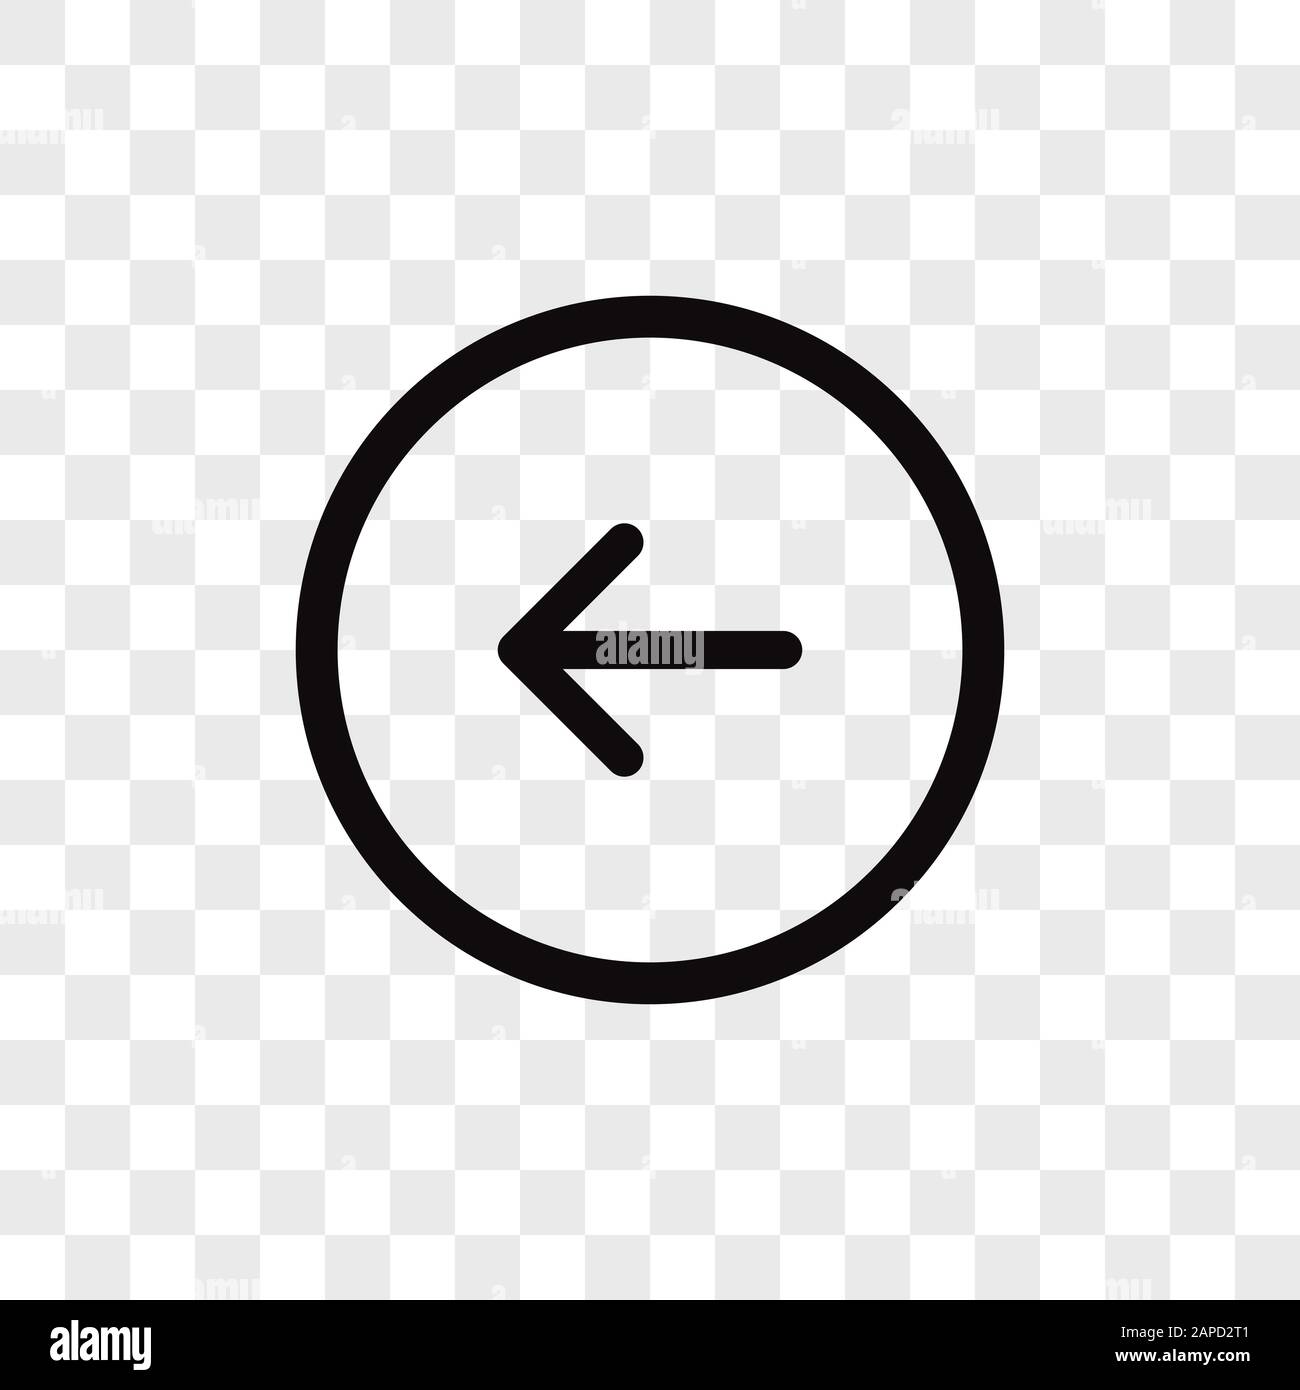 https://c8.alamy.com/comp/2APD2T1/left-arrow-back-button-vector-icon-in-modern-design-style-for-web-site-and-mobile-app-2APD2T1.jpg